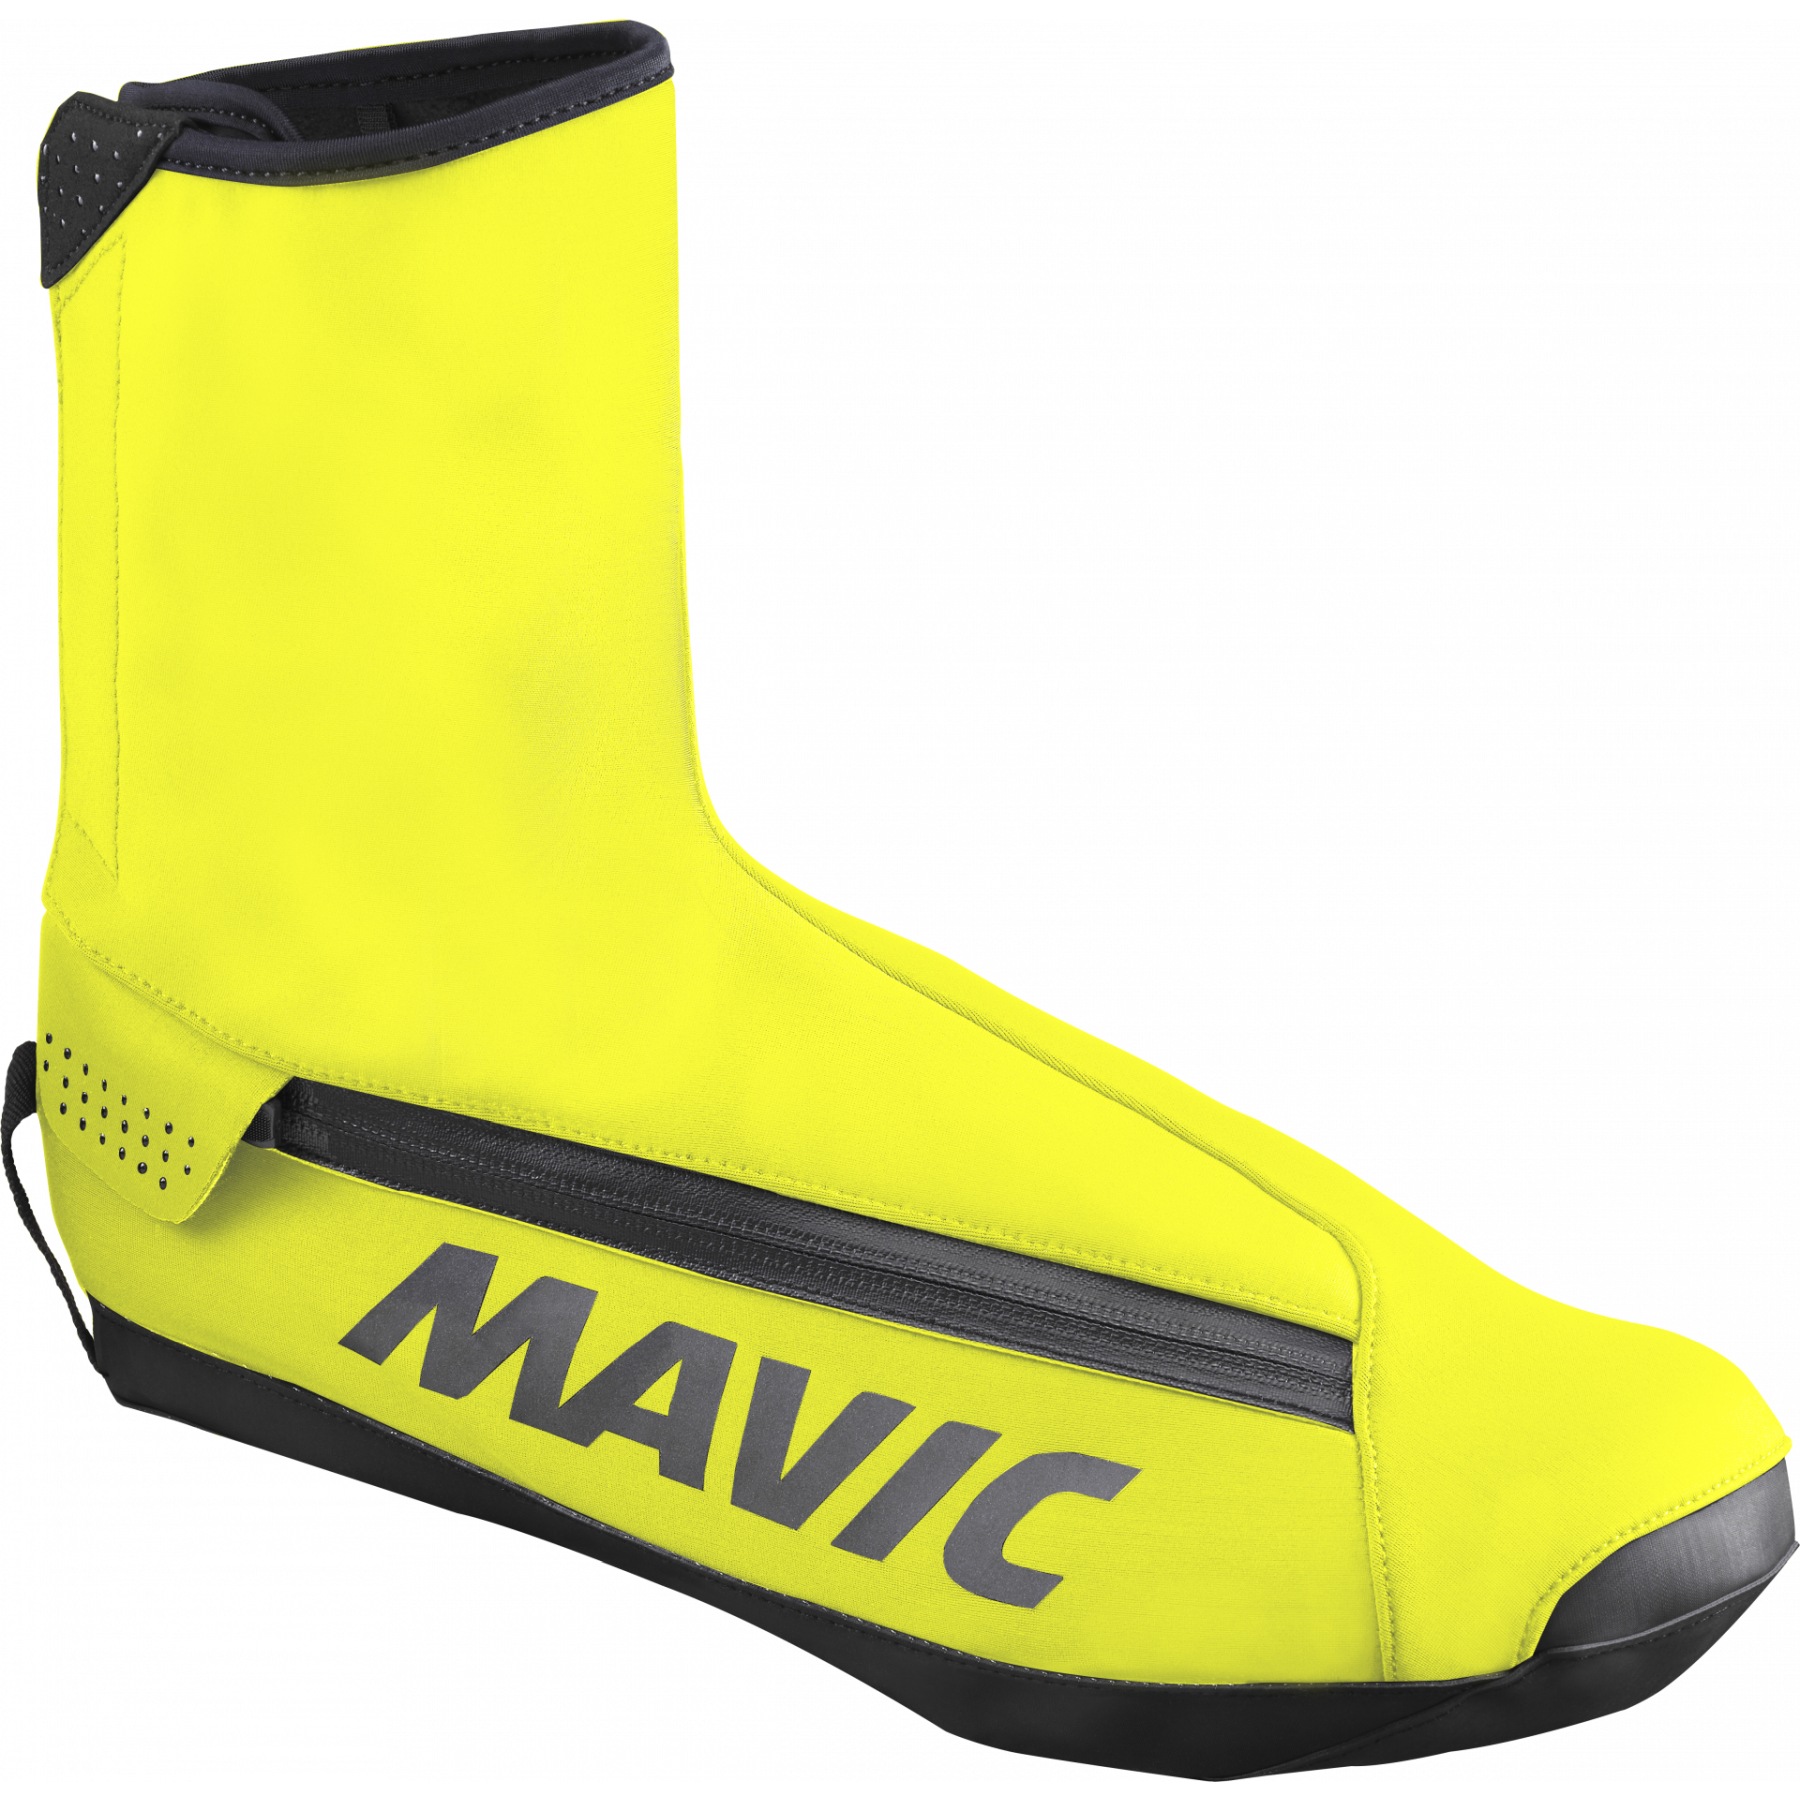 Image of Mavic Essential Thermo Road Shoe Cover - safety yellow